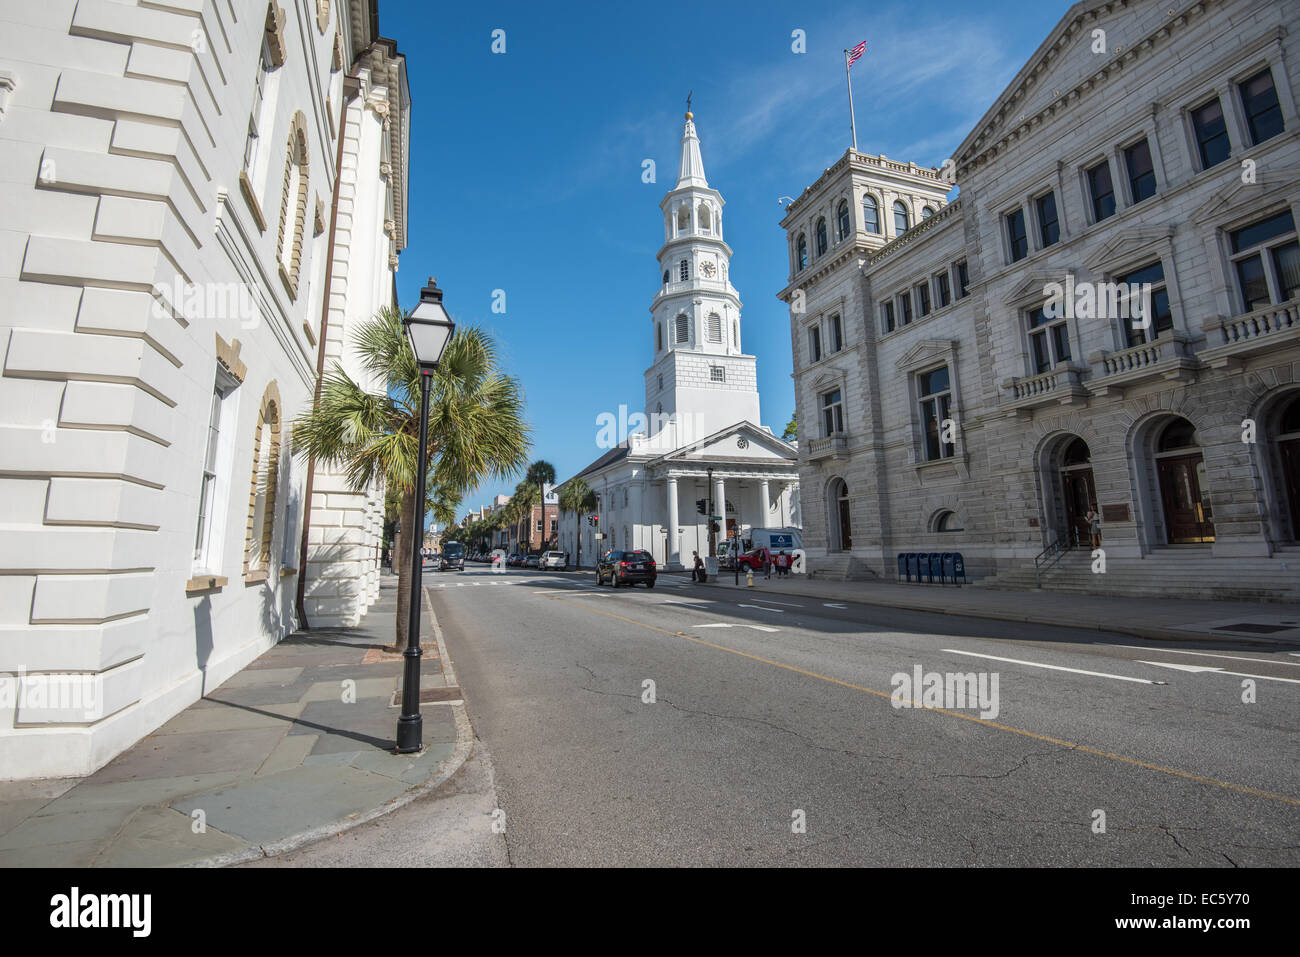 Rue Large avec St Michaels church in Charleston, SC. Banque D'Images